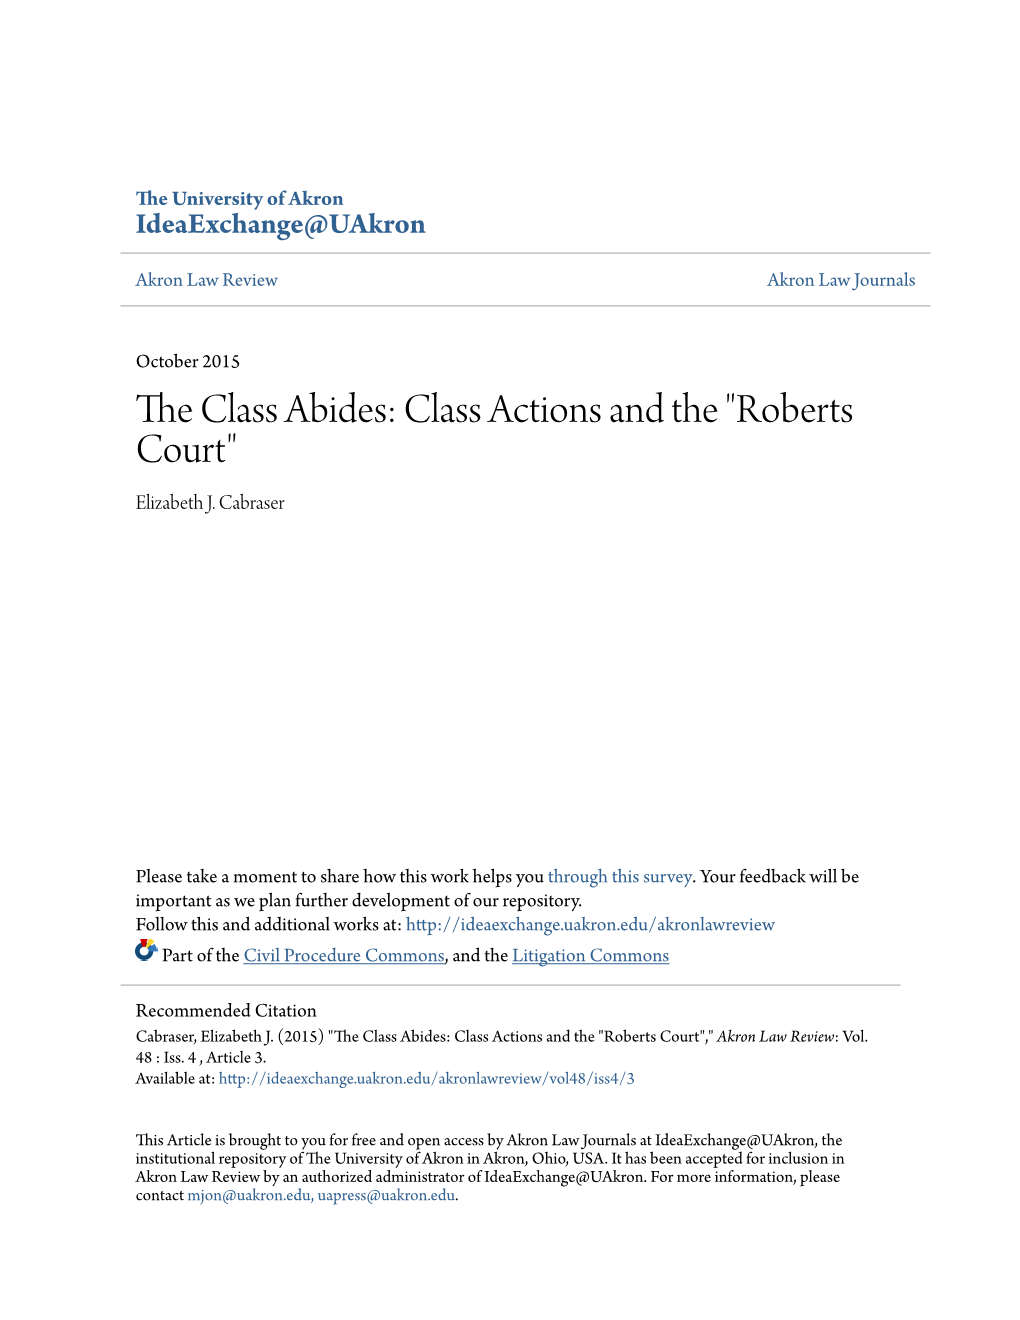 The Class Abides: Class Actions and the "Roberts Court"